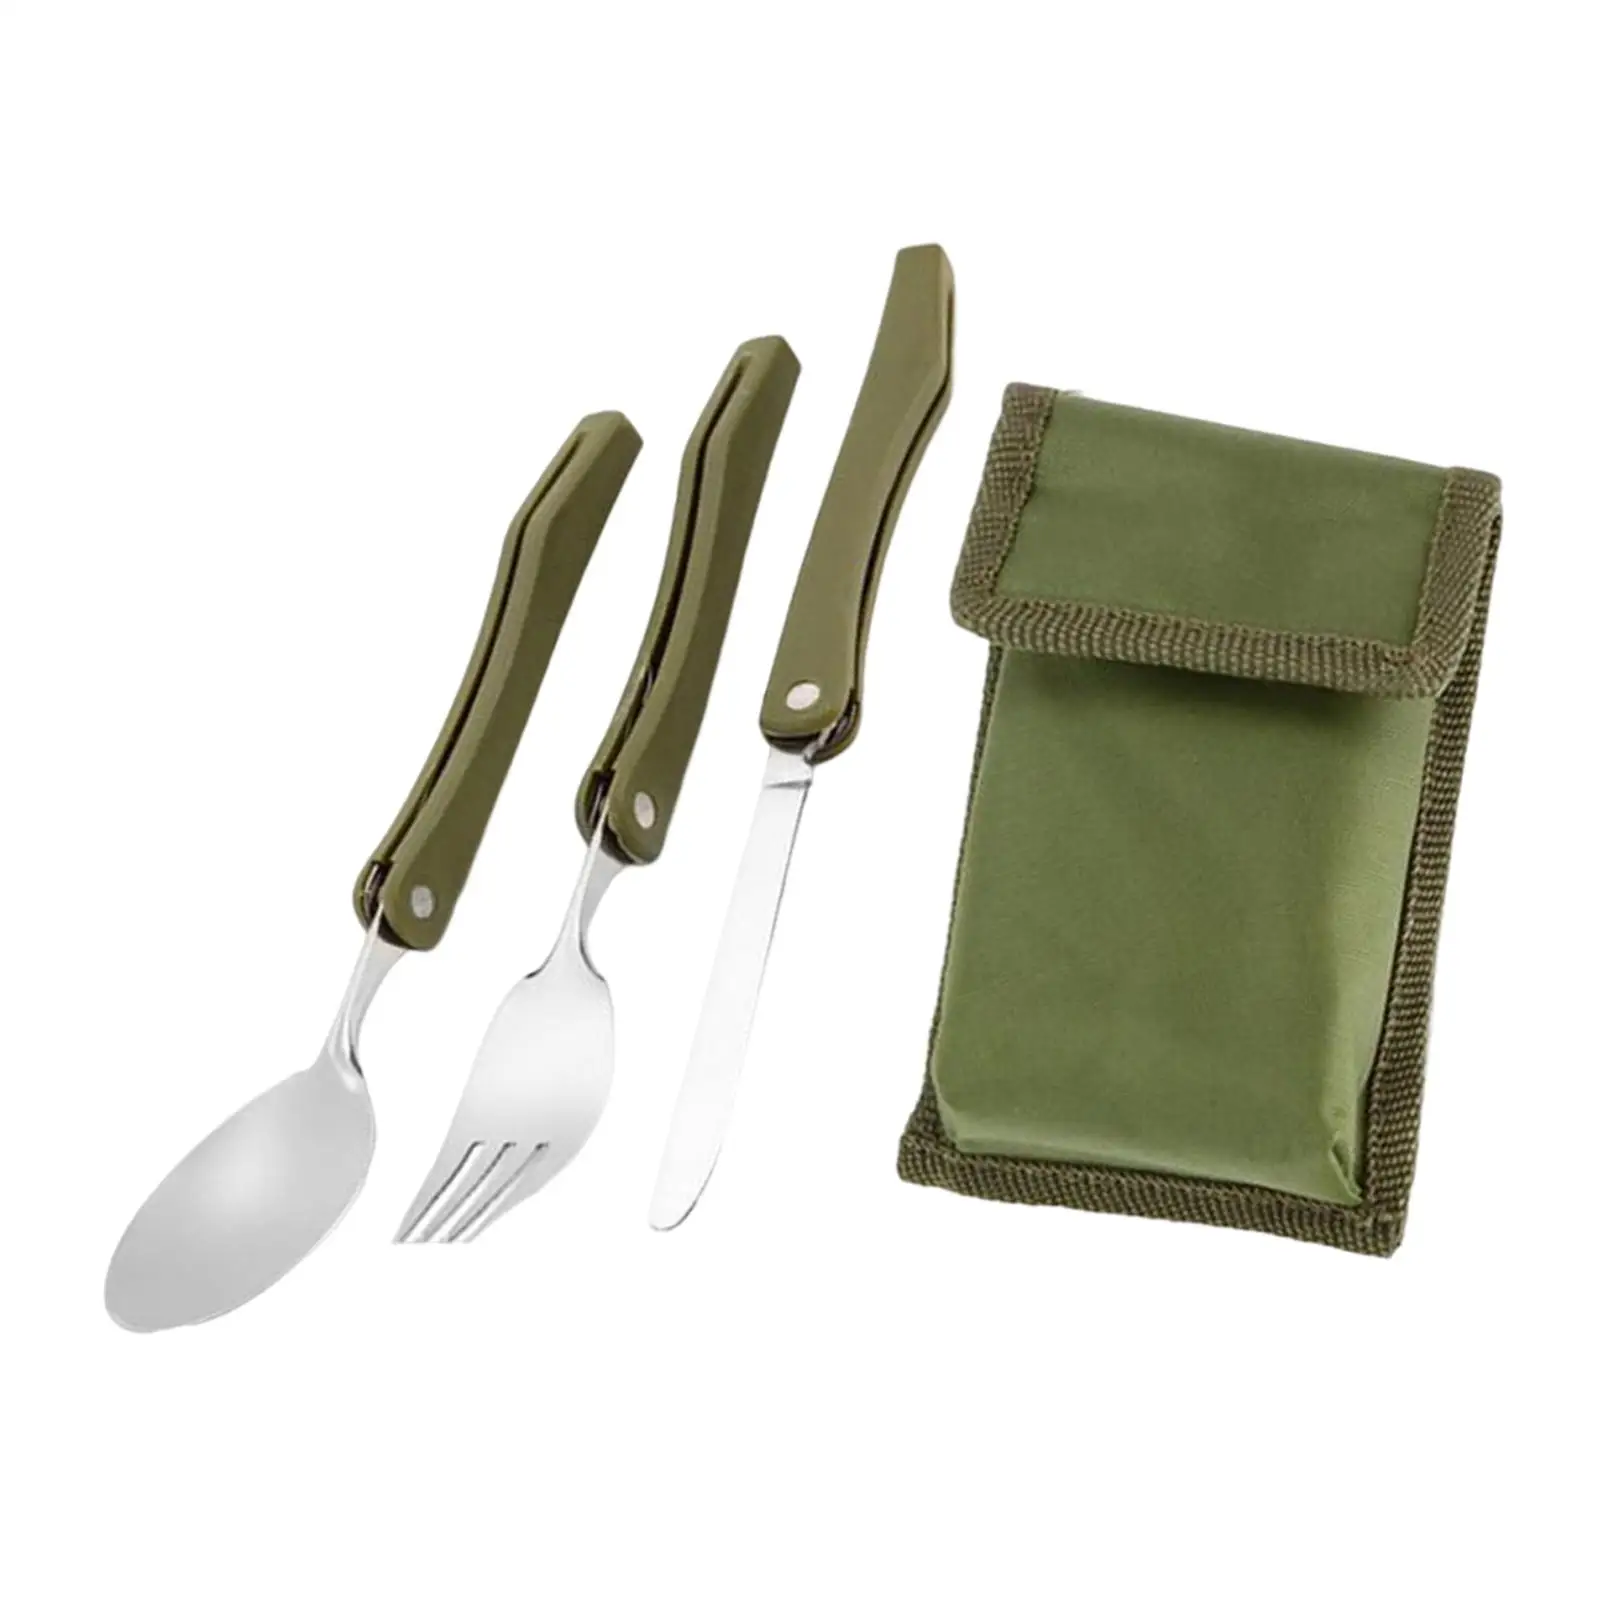 Camp Cutlery Fold Spoon Set Tableware for Backpacking Camping Hiking